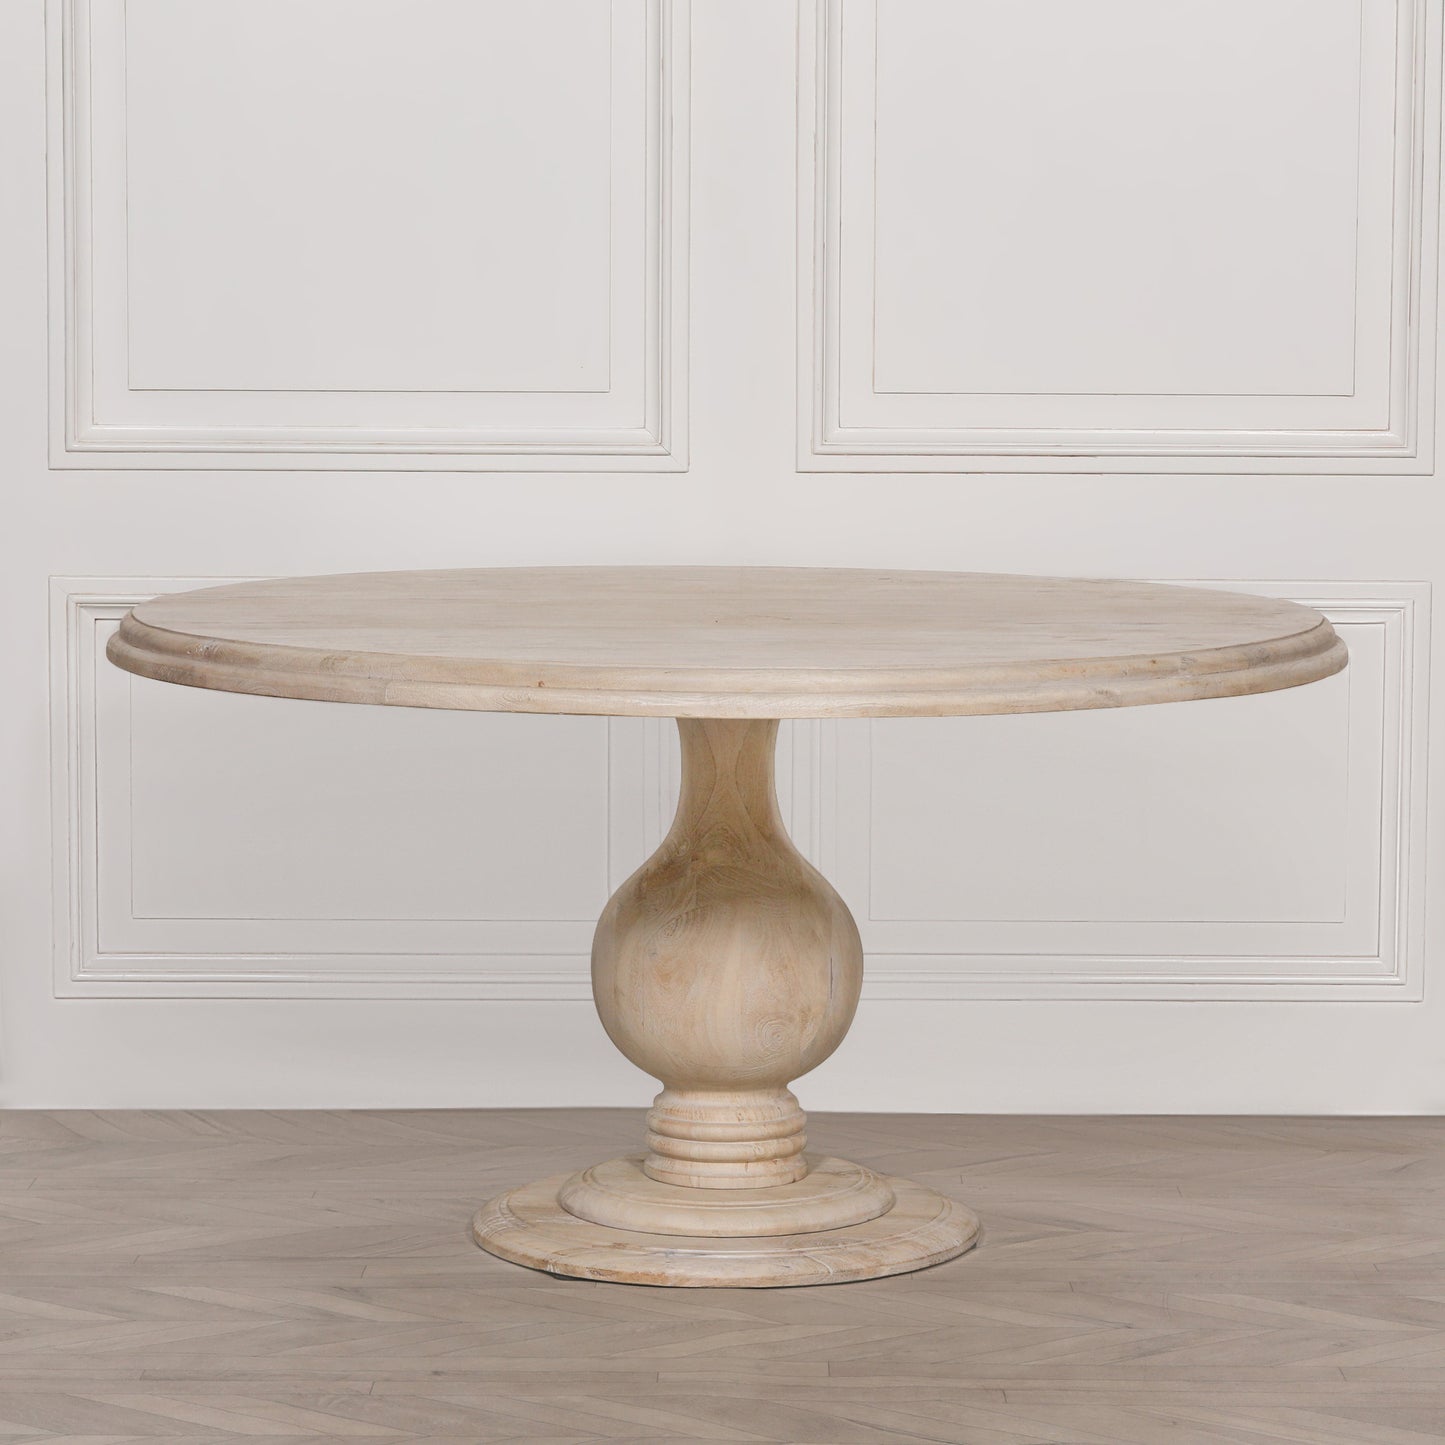 Blanche Wooden Round Dining Table 152cm CasaFenix